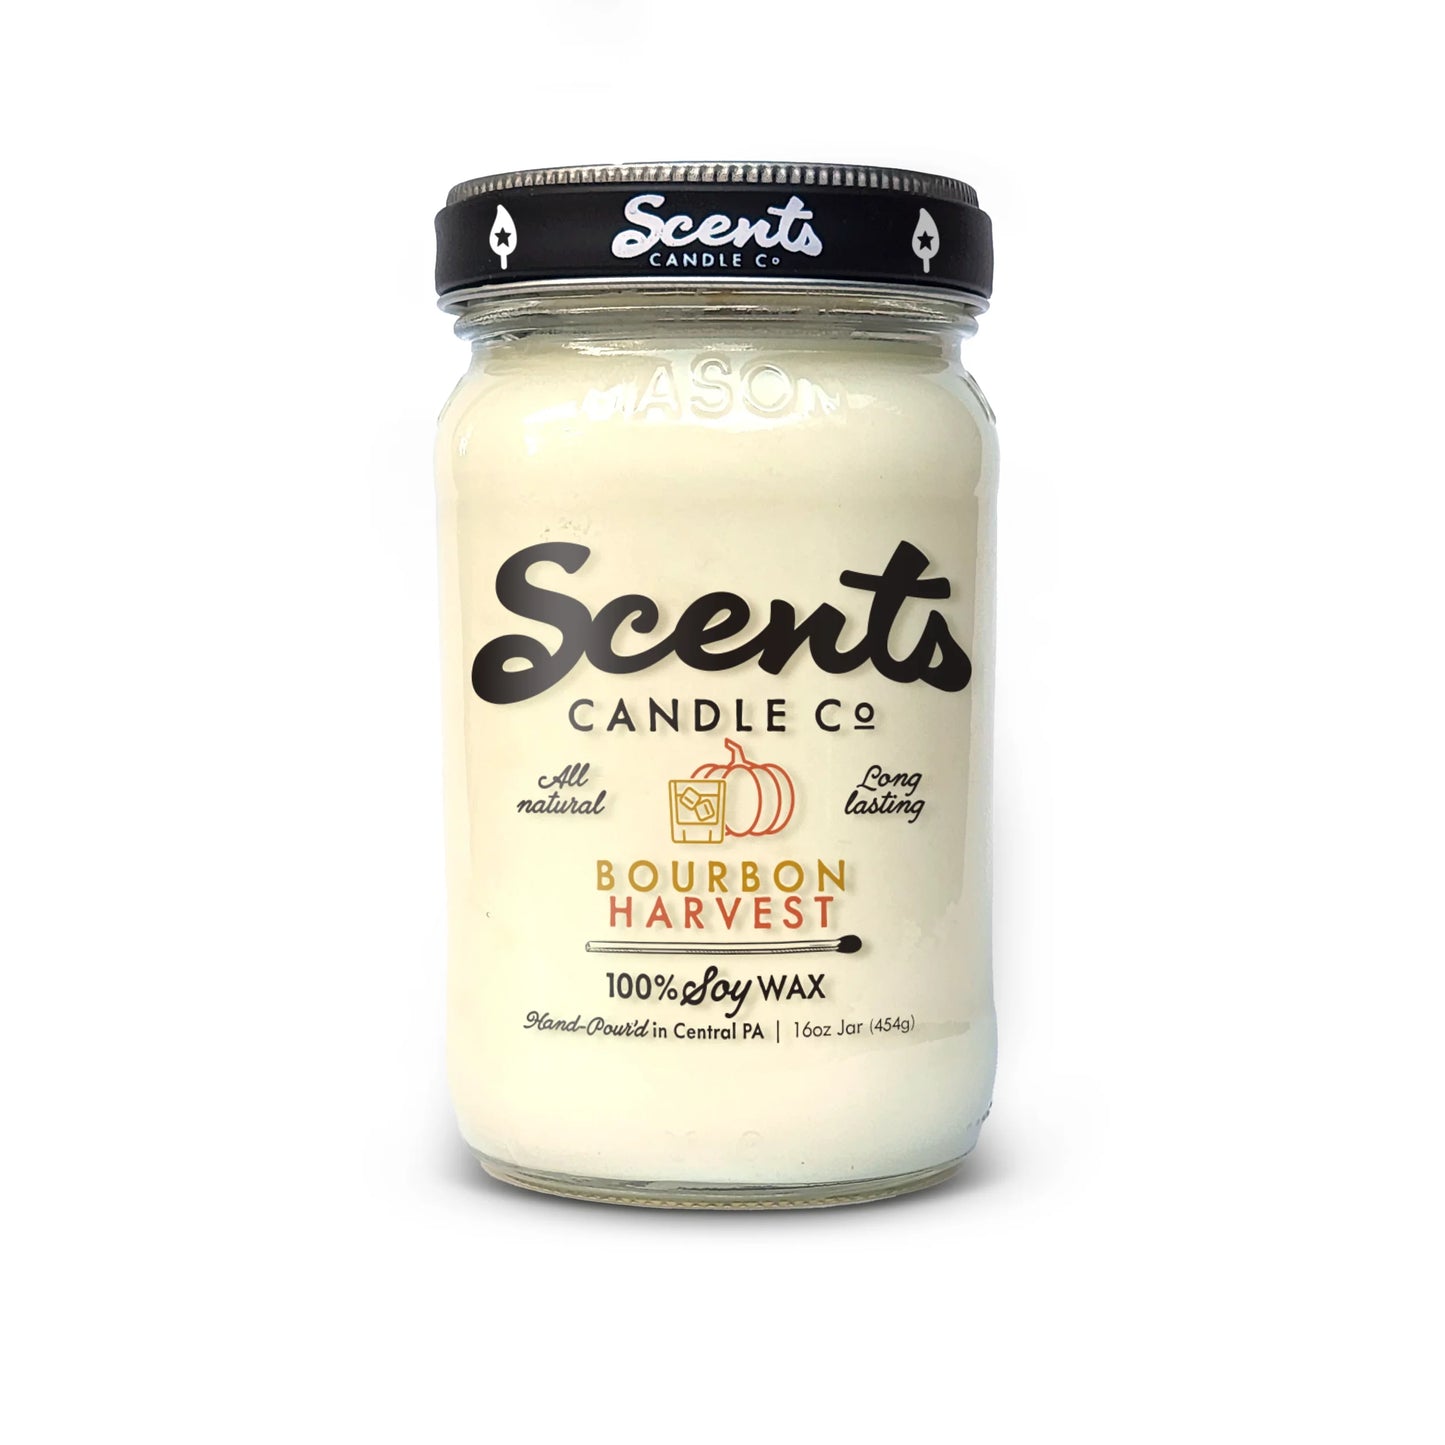 Scents Candle Co. Bourbon Harvest Soy Wax Candles